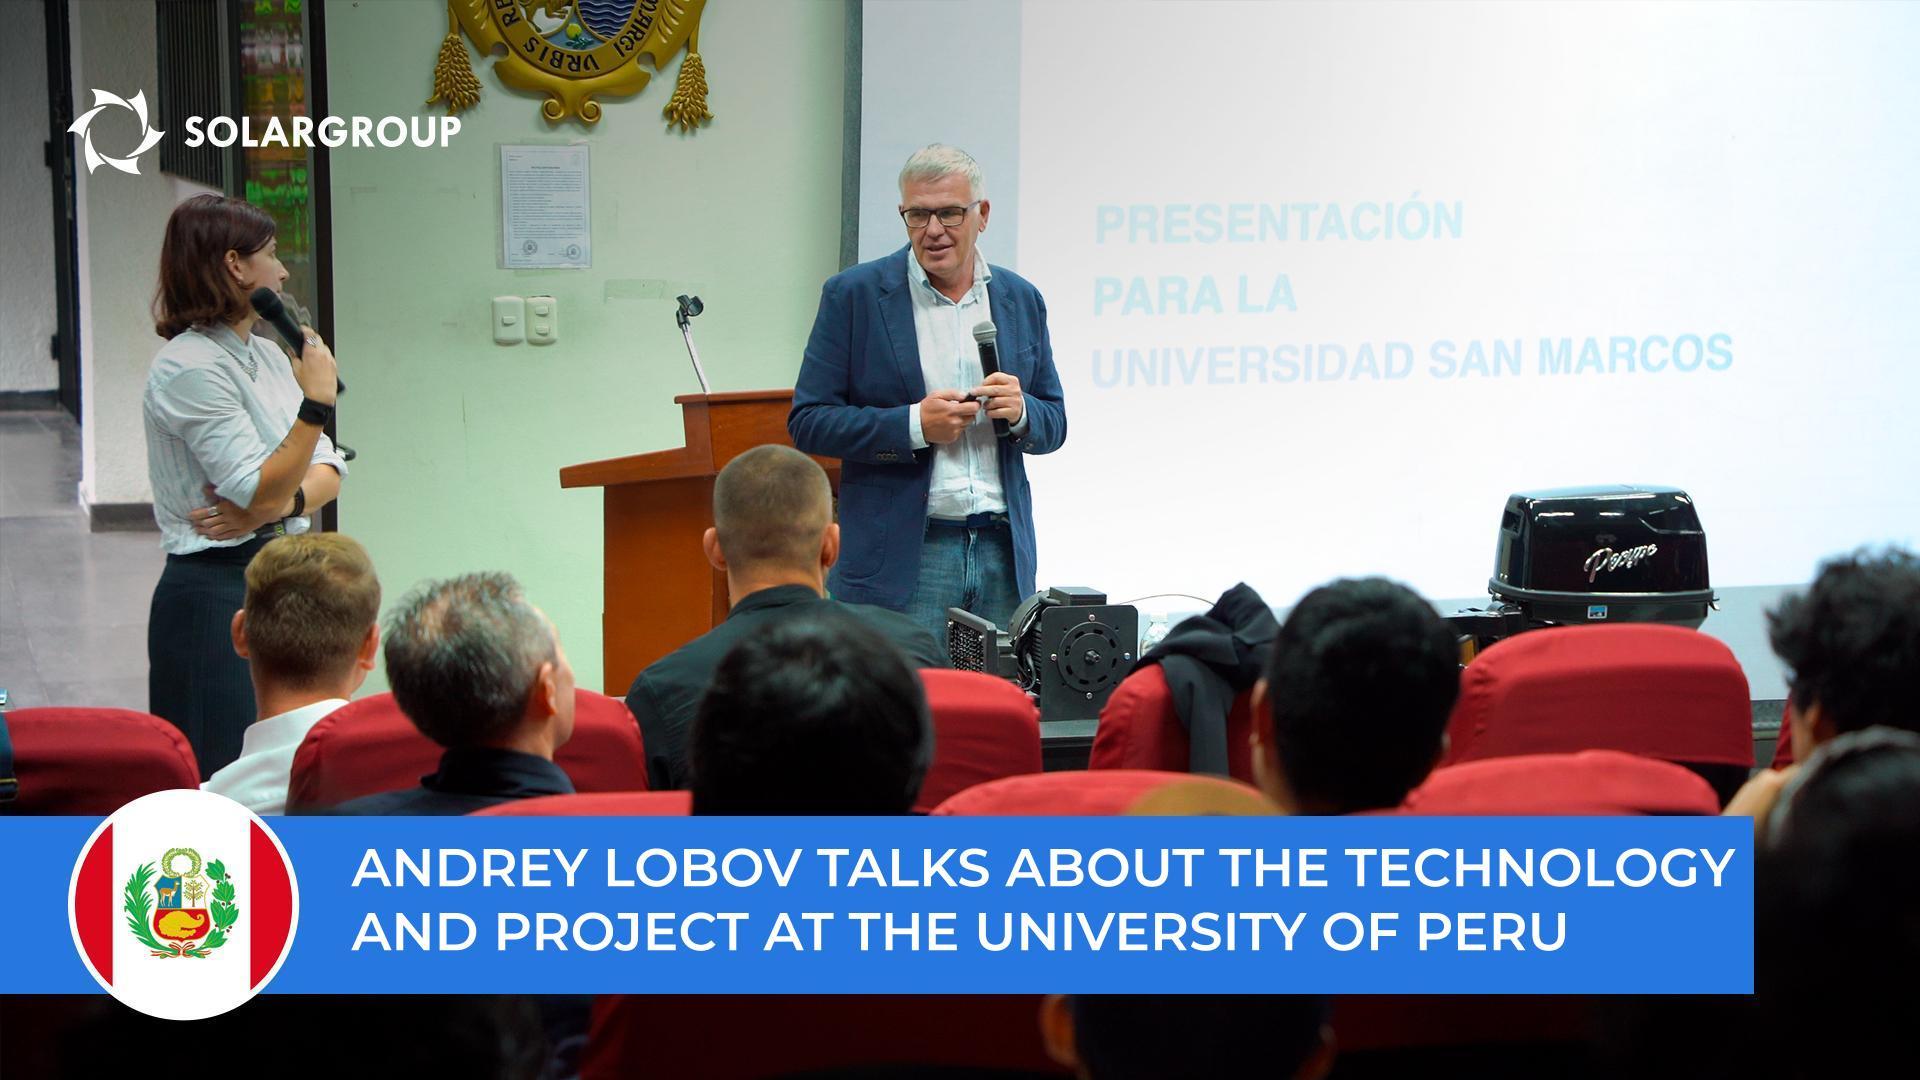 Andrey Lobov spoke about the technology and the project to students and professors at San Marcos University